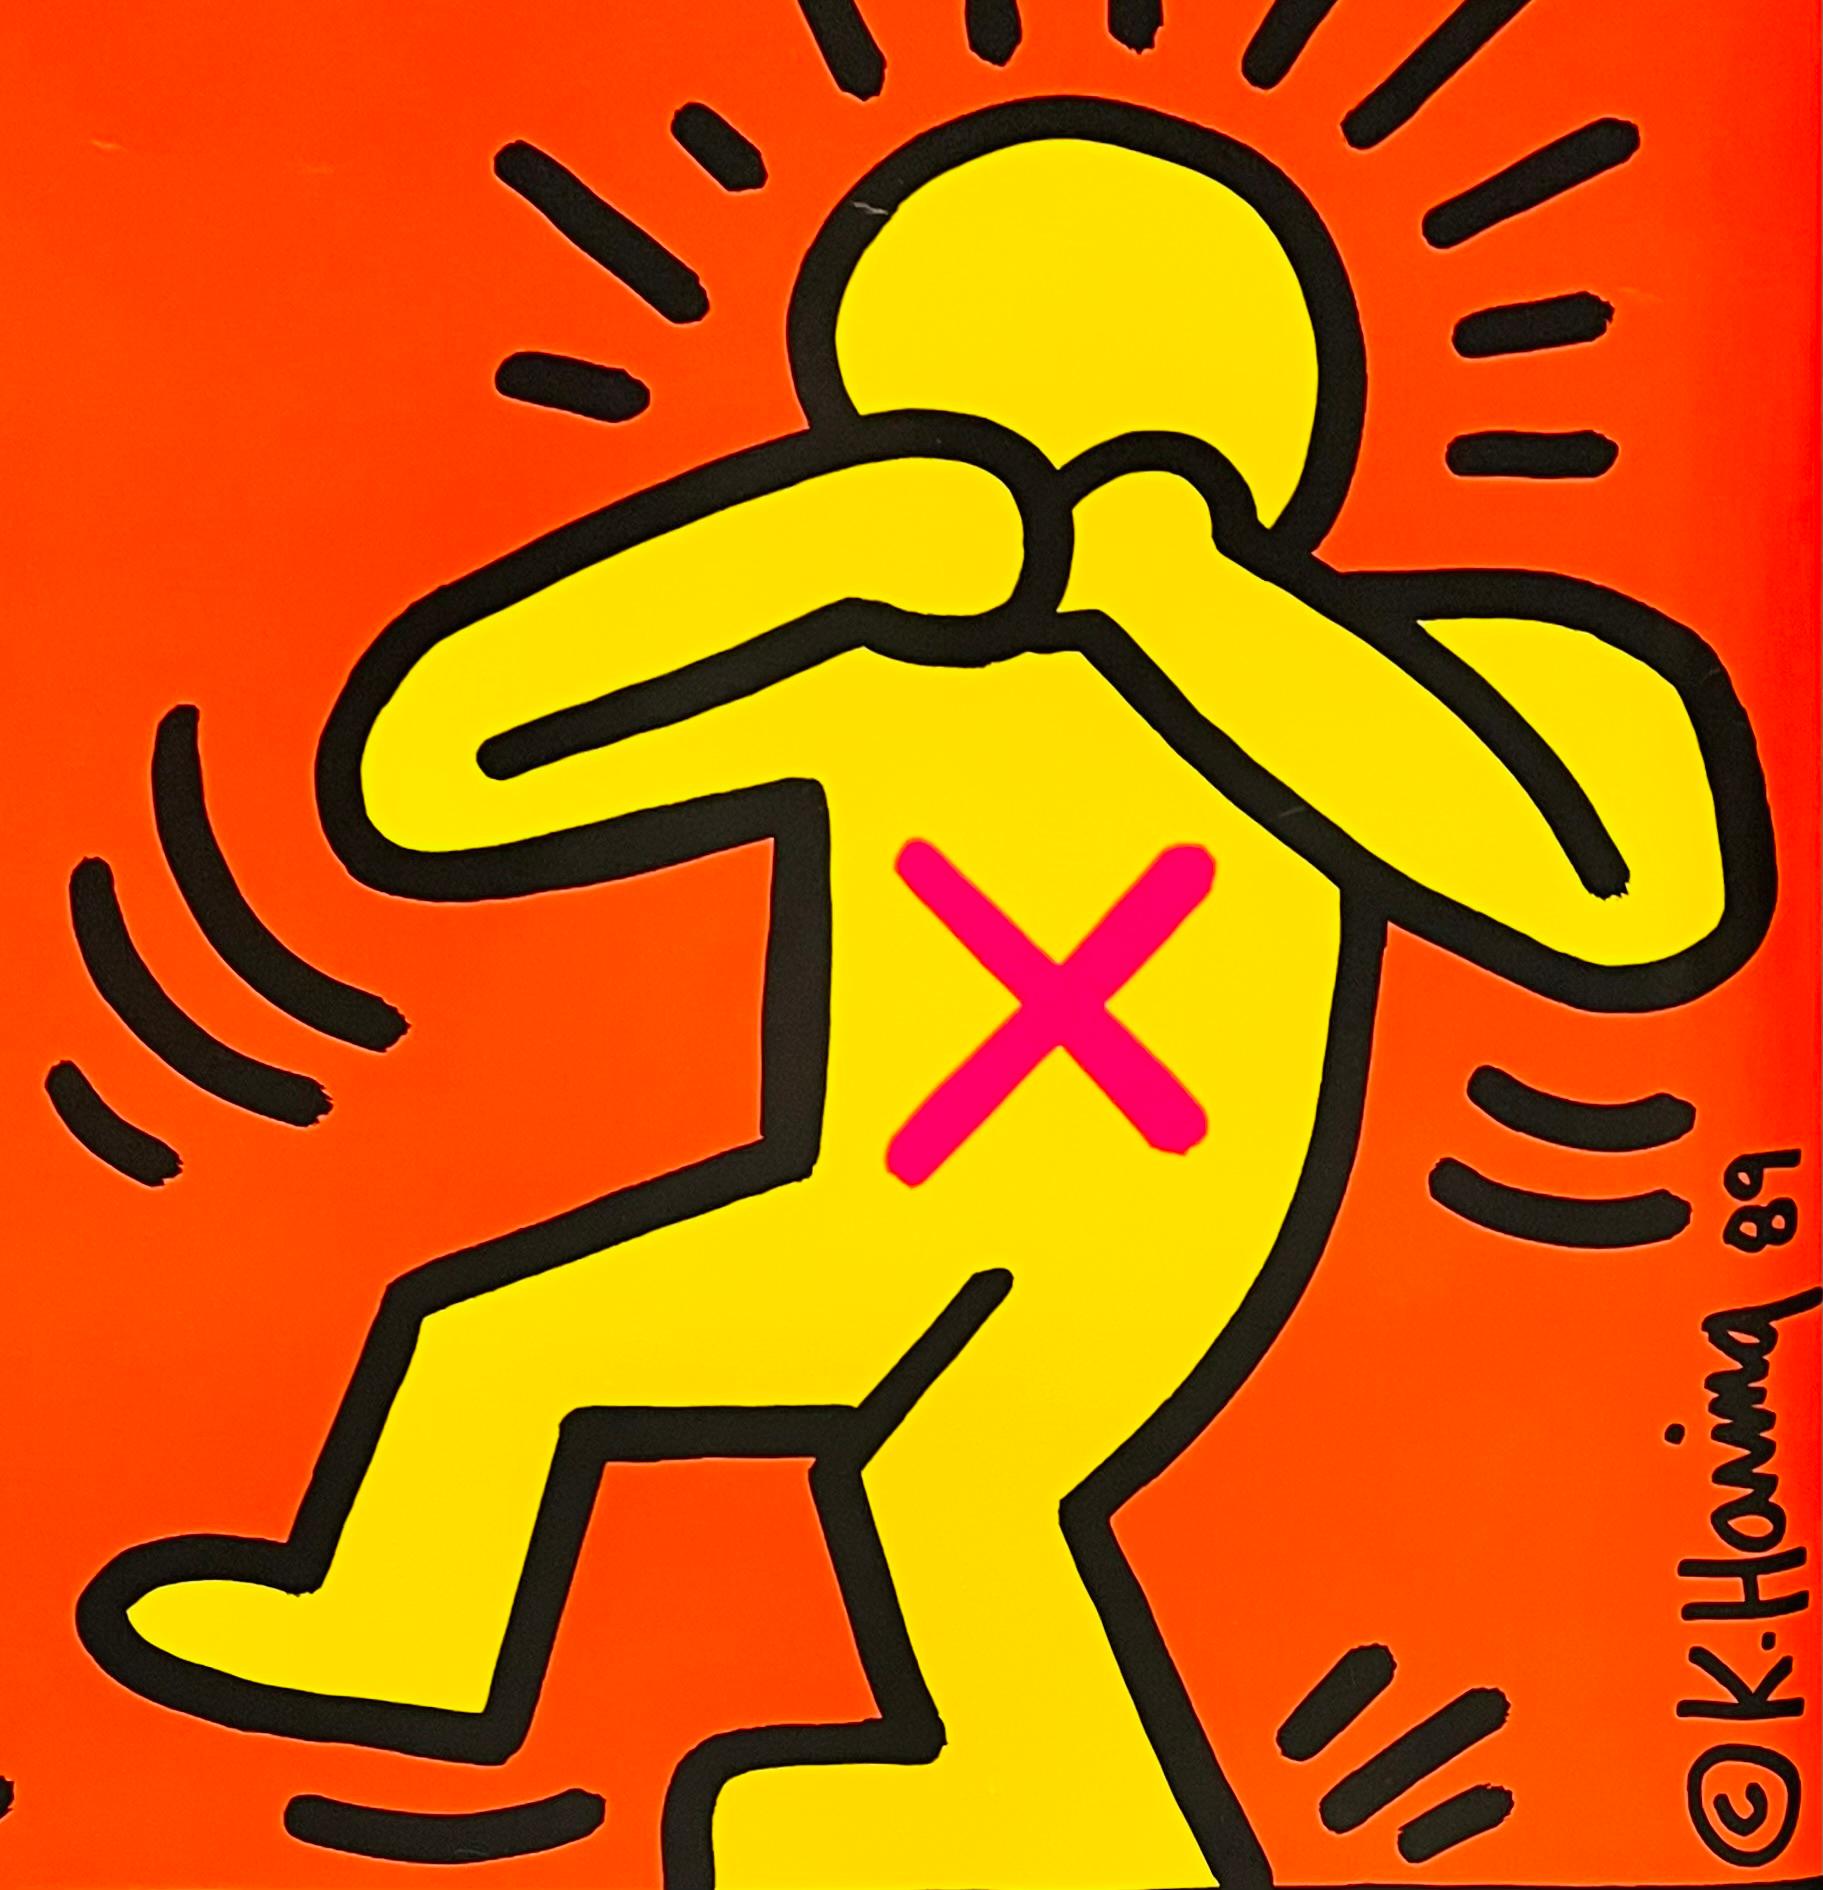 Original 1989 Keith Haring, Ignorance = Fear Silence = Death poster:
On behalf of the New York-based AIDS activist group AIDS Coalition to Unleash Power (ACT UP), Keith Haring designed and executed this poster in 1989 after the artist had been